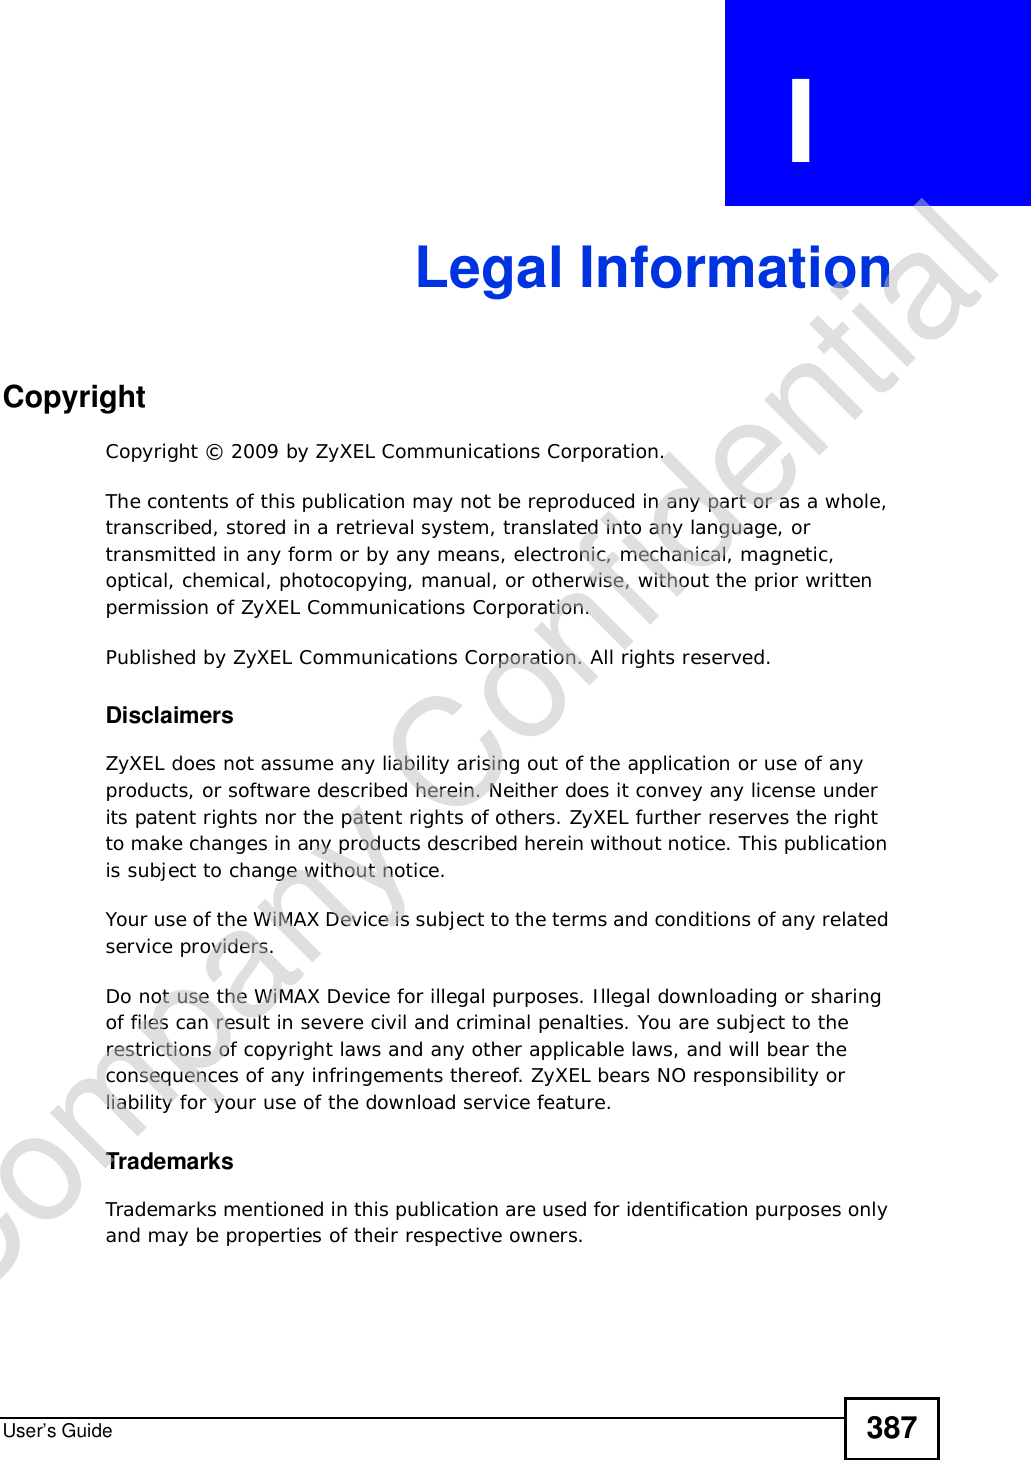 User’s Guide 387APPENDIX  I Legal InformationCopyrightCopyright © 2009 by ZyXEL Communications Corporation.The contents of this publication may not be reproduced in any part or as a whole, transcribed, stored in a retrieval system, translated into any language, or transmitted in any form or by any means, electronic, mechanical, magnetic, optical, chemical, photocopying, manual, or otherwise, without the prior written permission of ZyXEL Communications Corporation.Published by ZyXEL Communications Corporation. All rights reserved.DisclaimersZyXEL does not assume any liability arising out of the application or use of any products, or software described herein. Neither does it convey any license under its patent rights nor the patent rights of others. ZyXEL further reserves the right to make changes in any products described herein without notice. This publication is subject to change without notice.Your use of the WiMAX Device is subject to the terms and conditions of any related service providers.Do not use the WiMAX Device for illegal purposes. Illegal downloading or sharing of files can result in severe civil and criminal penalties. You are subject to the restrictions of copyright laws and any other applicable laws, and will bear the consequences of any infringements thereof. ZyXEL bears NO responsibility or liability for your use of the download service feature.TrademarksTrademarks mentioned in this publication are used for identification purposes only and may be properties of their respective owners.Company Confidential